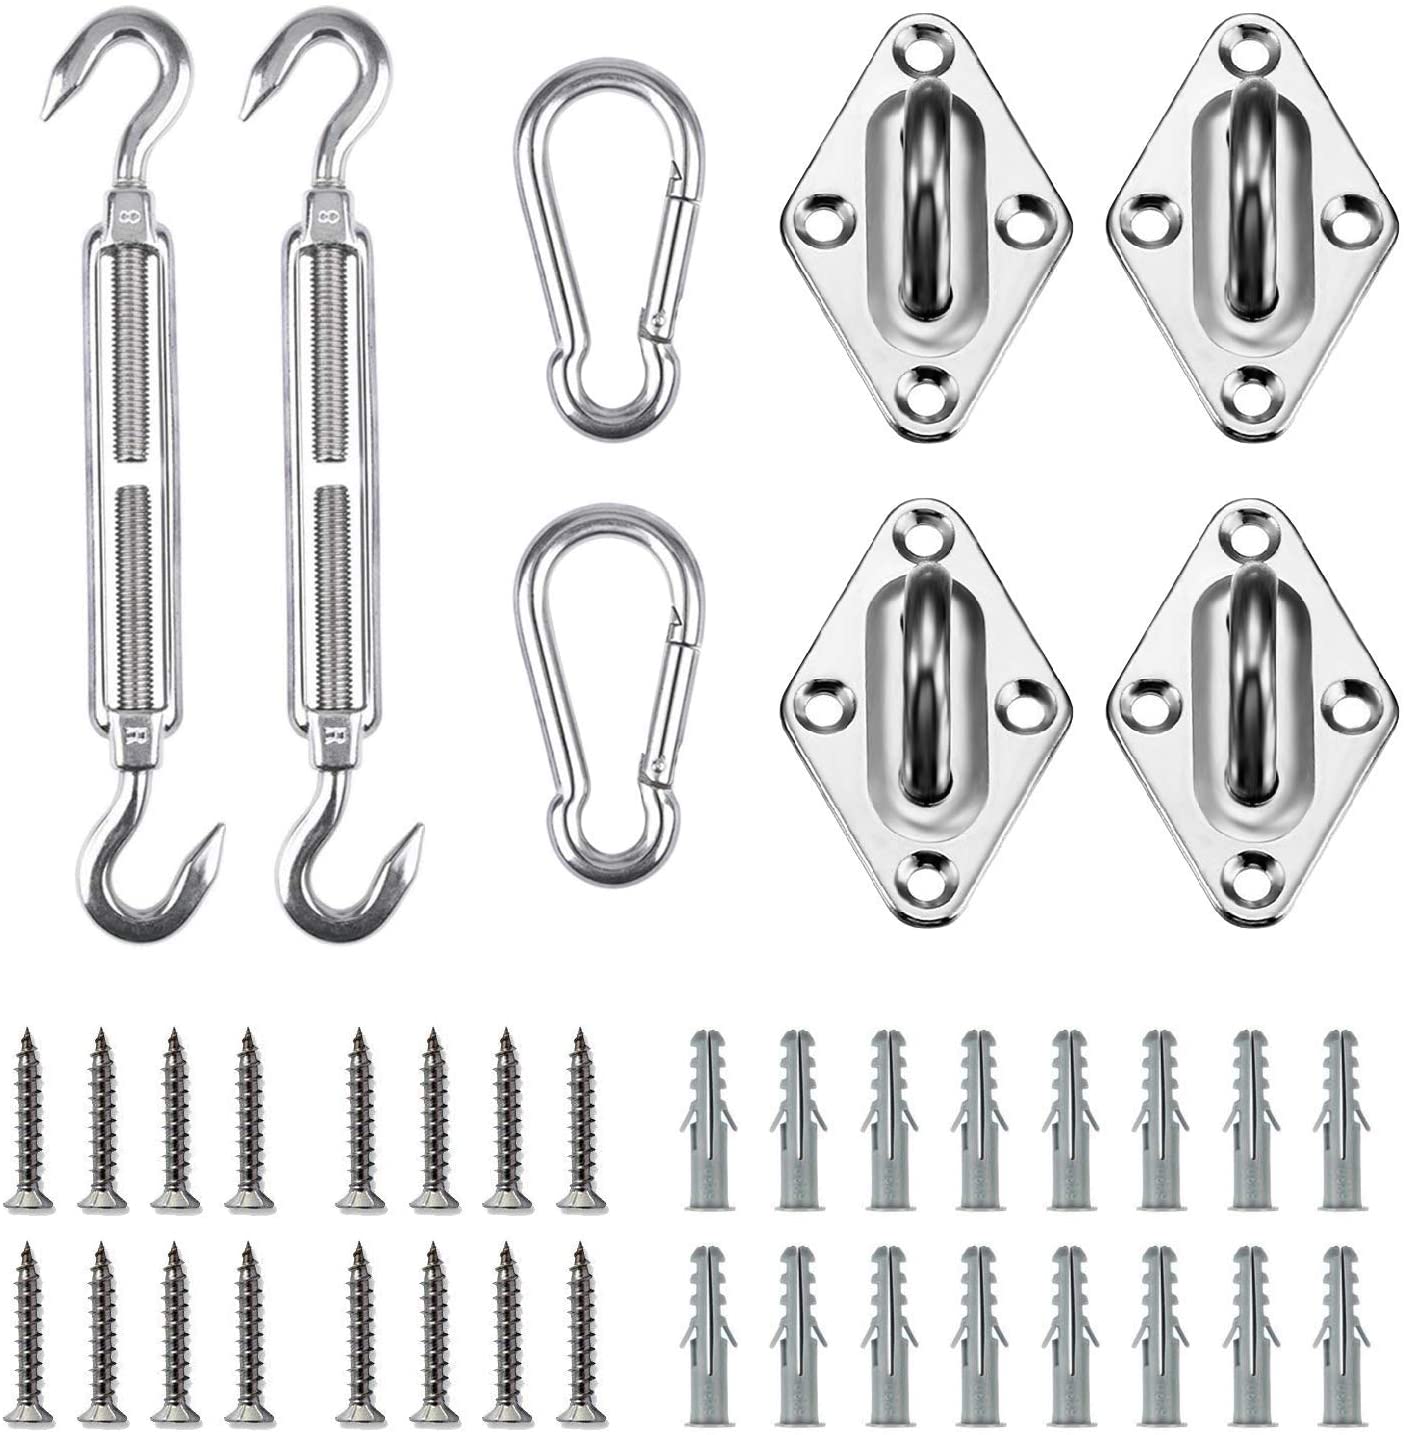 Sun Shade Sail Hardware Kit for Rectangle Square Shade Sail Outdoor Installation 304 Stainless Steel KGORGE Store